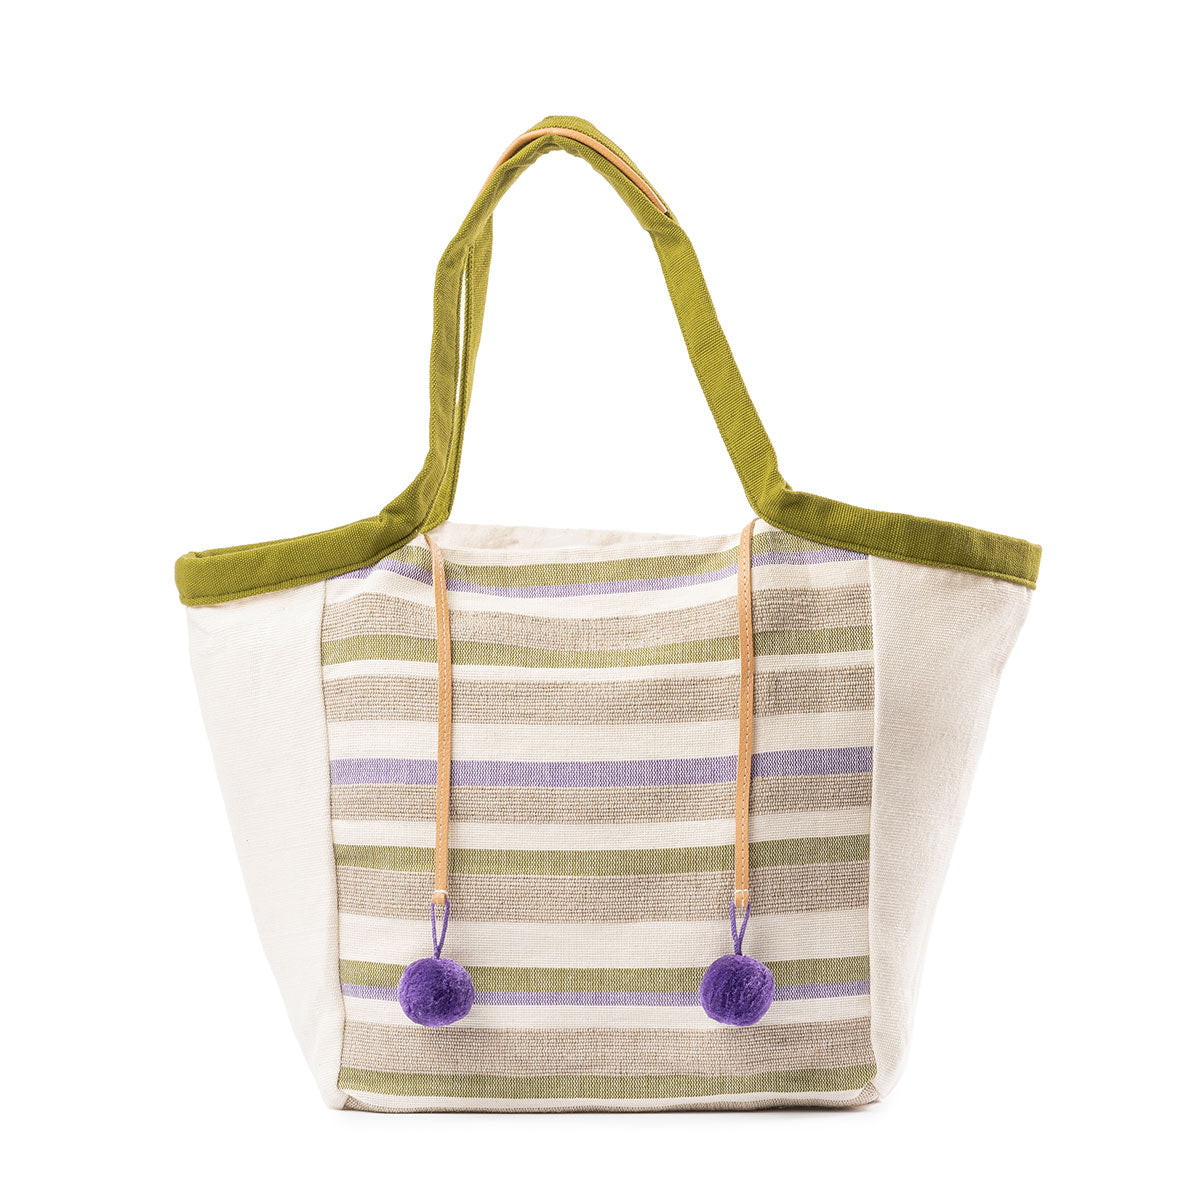 Artisan Rose Handwoven Tote in Woodland Stripes. The center has a pastel green, purple, and beige horizontal stripe pattern. The sides have beige fabric. It has moss green handles with leather detailing. It has two purple pompoms attached to leather cords.